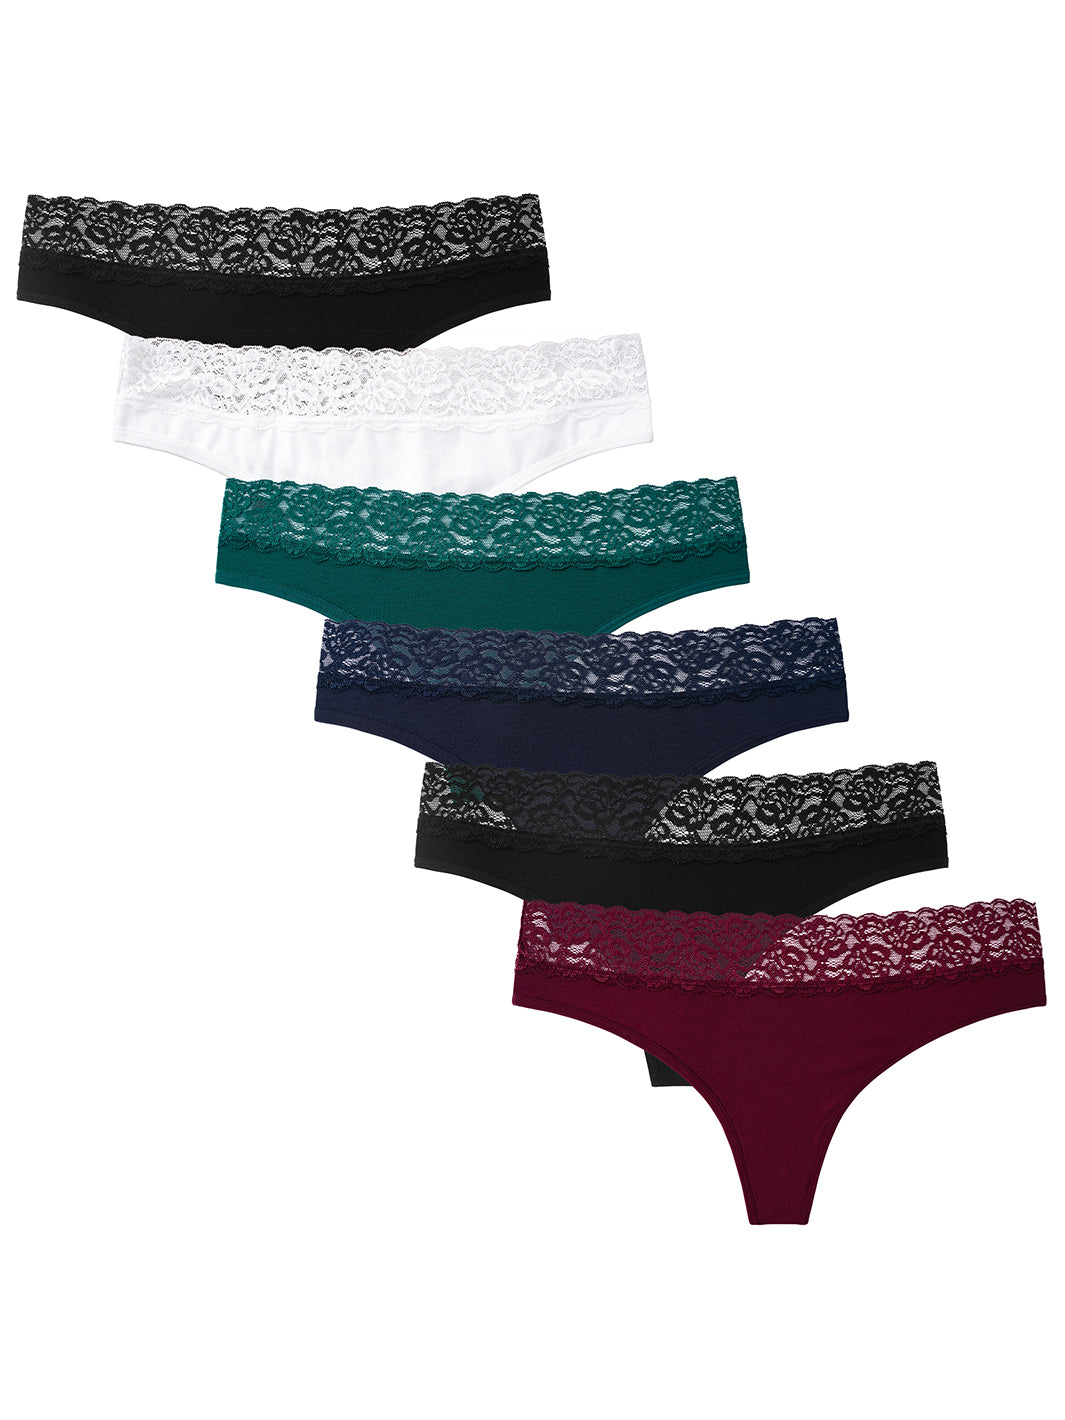 INNERSY Ladies Thongs Multipack Cotton G String Knickers Women Sexy  Underwear Panties Pack of 5 (12, Multicolor) : : Fashion